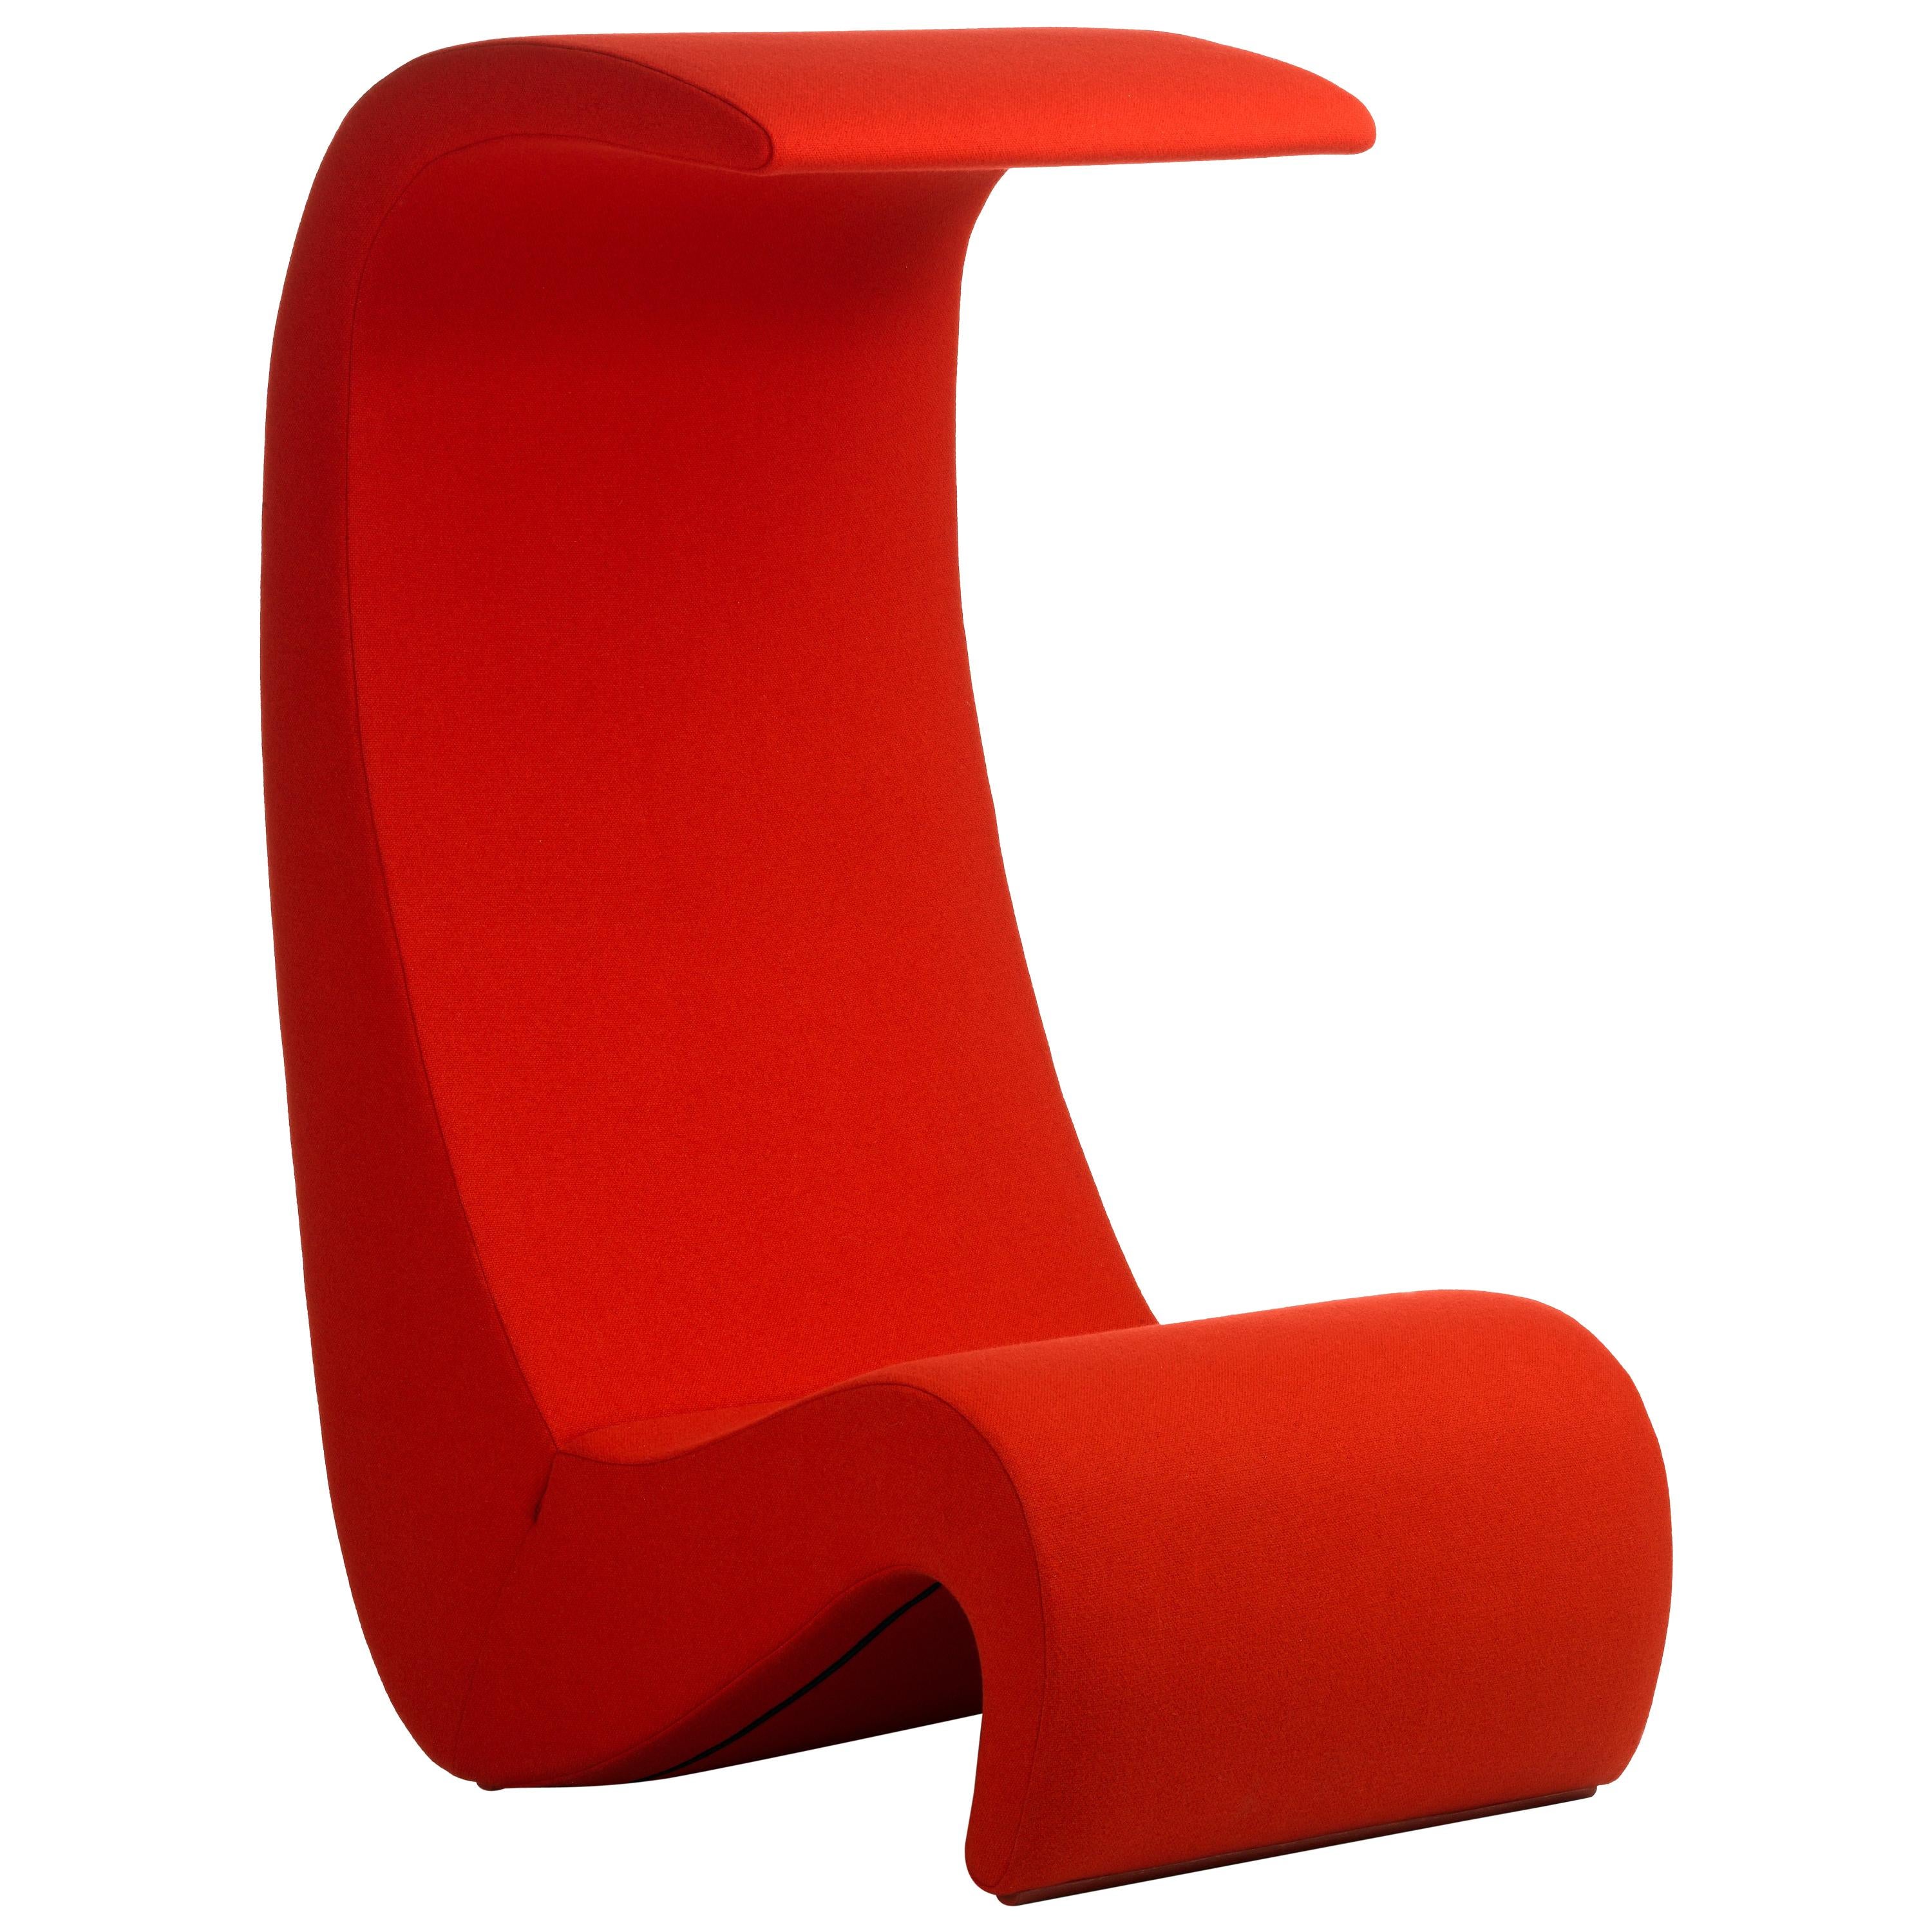 Vitra Amoebe High Back Chair in Red by Verner Panton For Sale